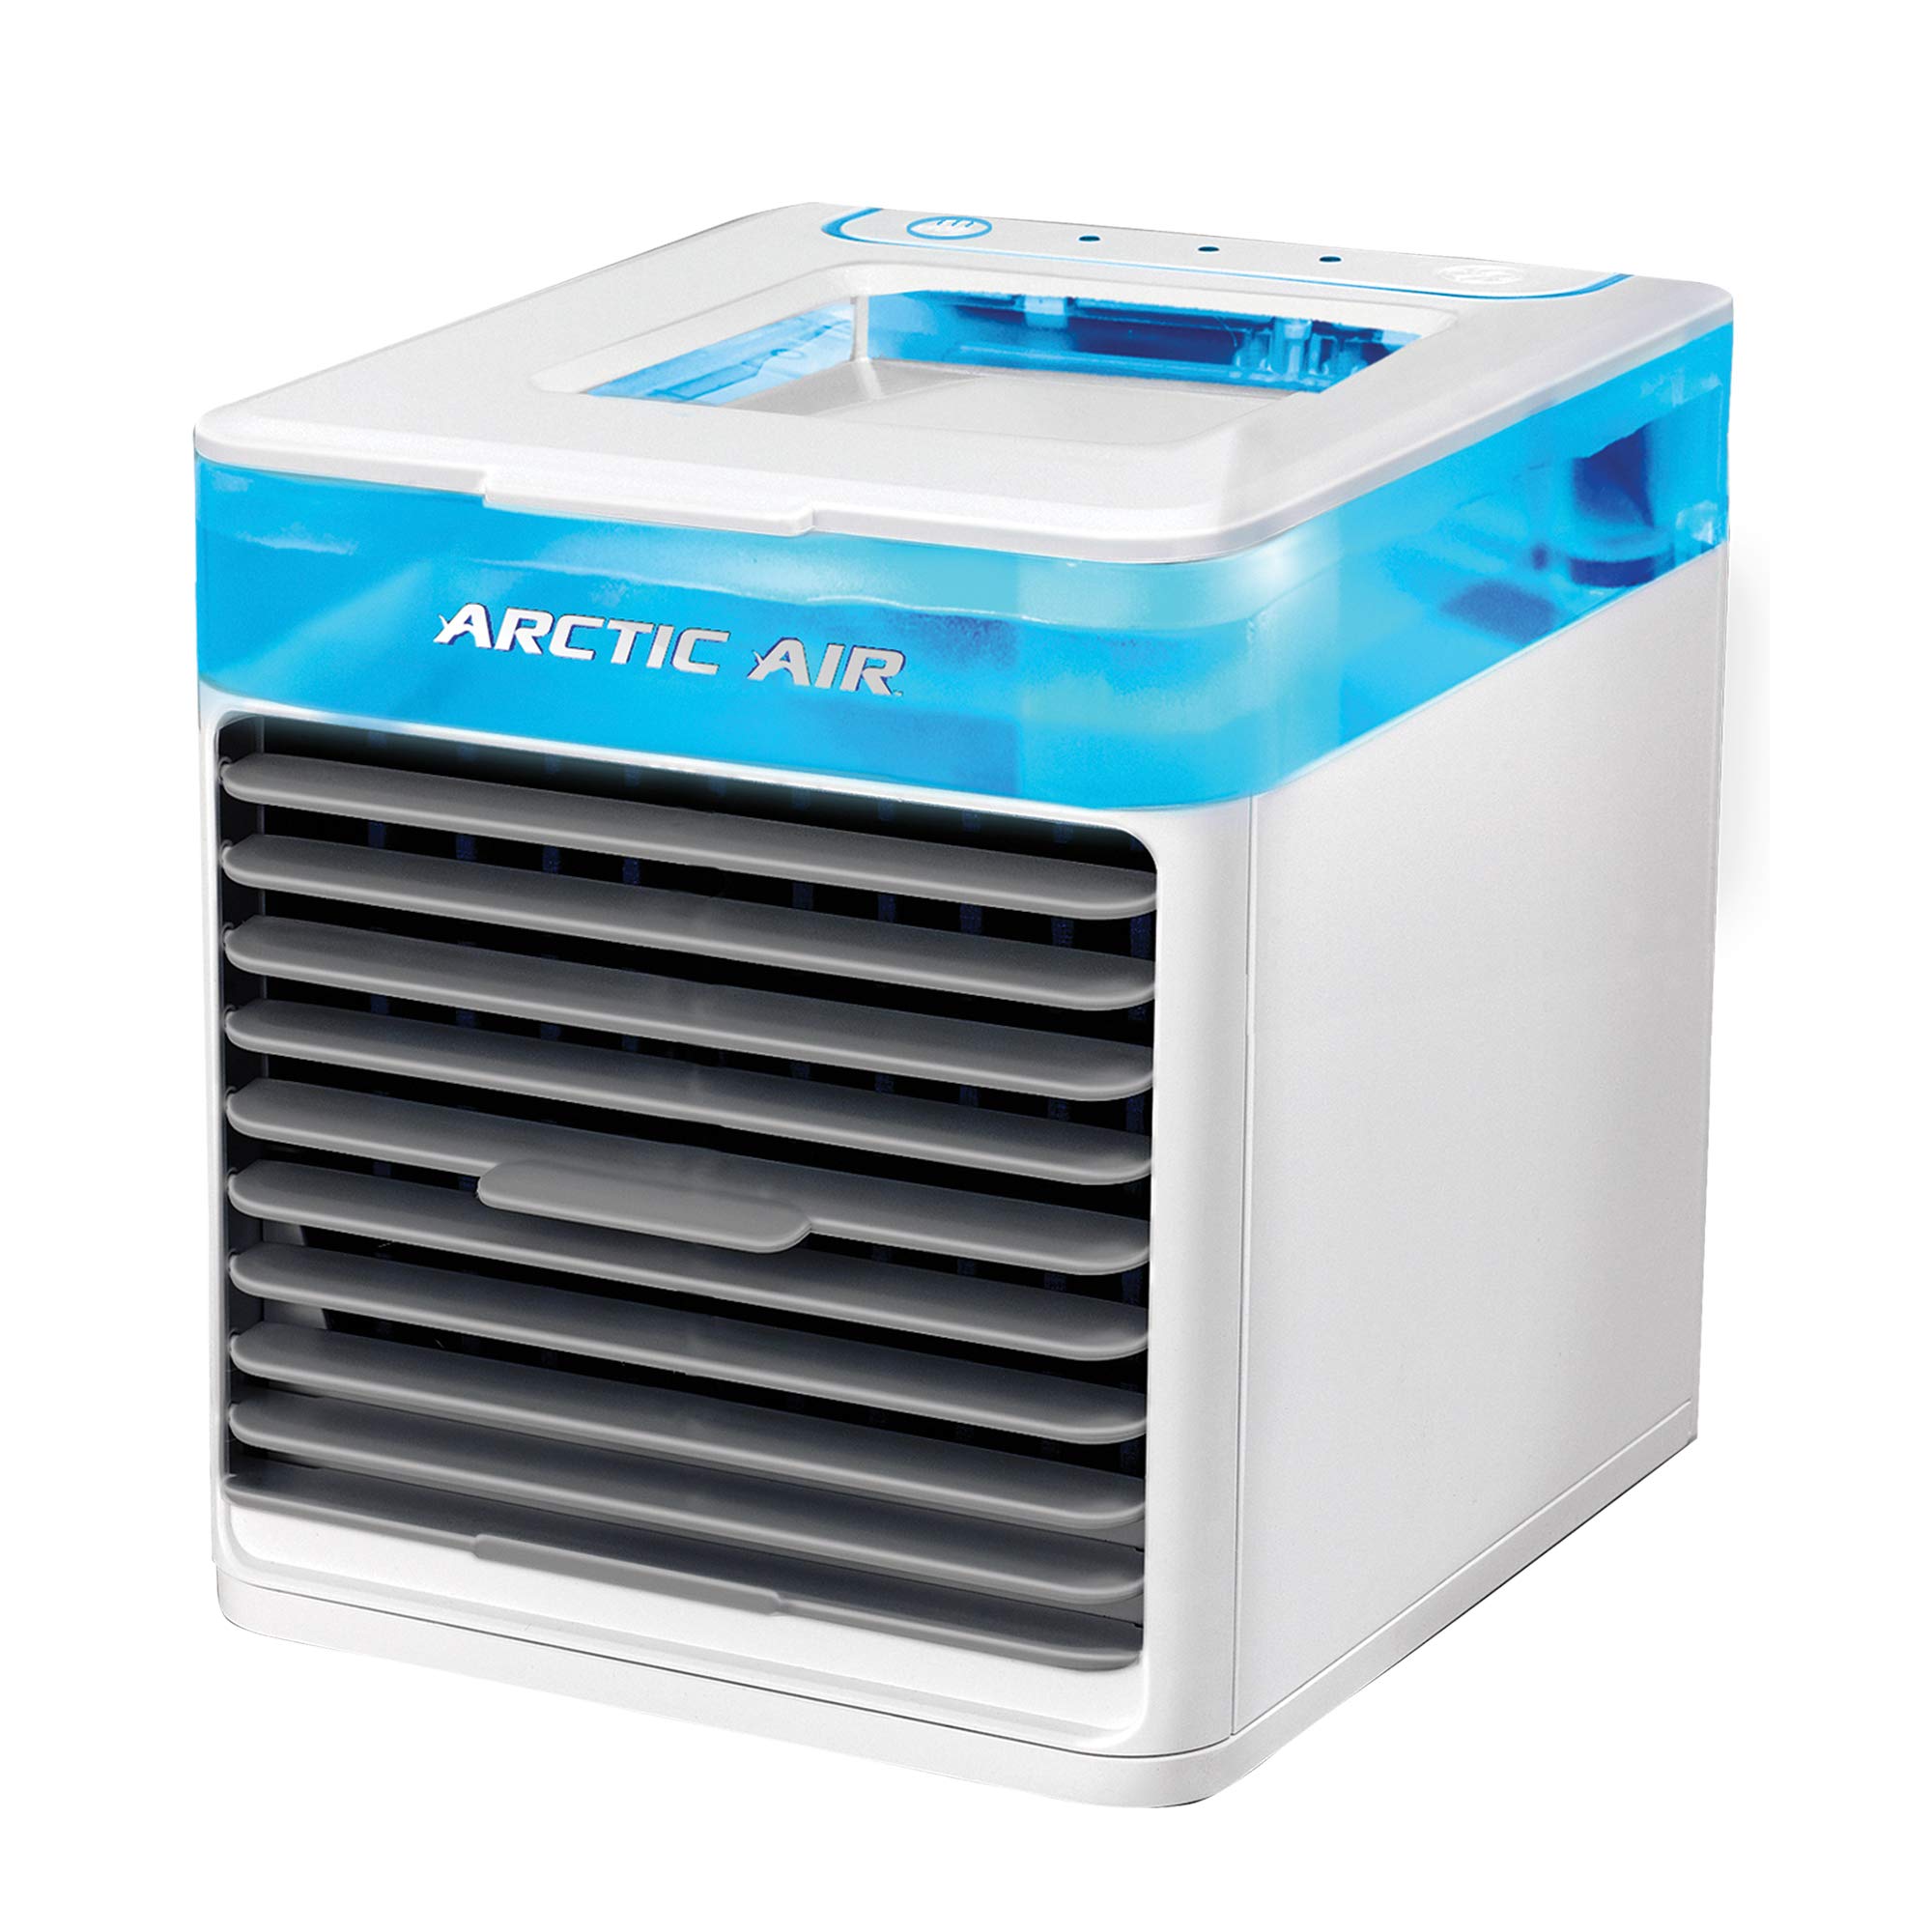 Arctic Air Pure Chill Evaporative Air Cooler By Ontel - Powerful 3-Speed Personal Space Cooler, Quiet, Lightweight And Portable For Bedroom, Office, Living Room & More